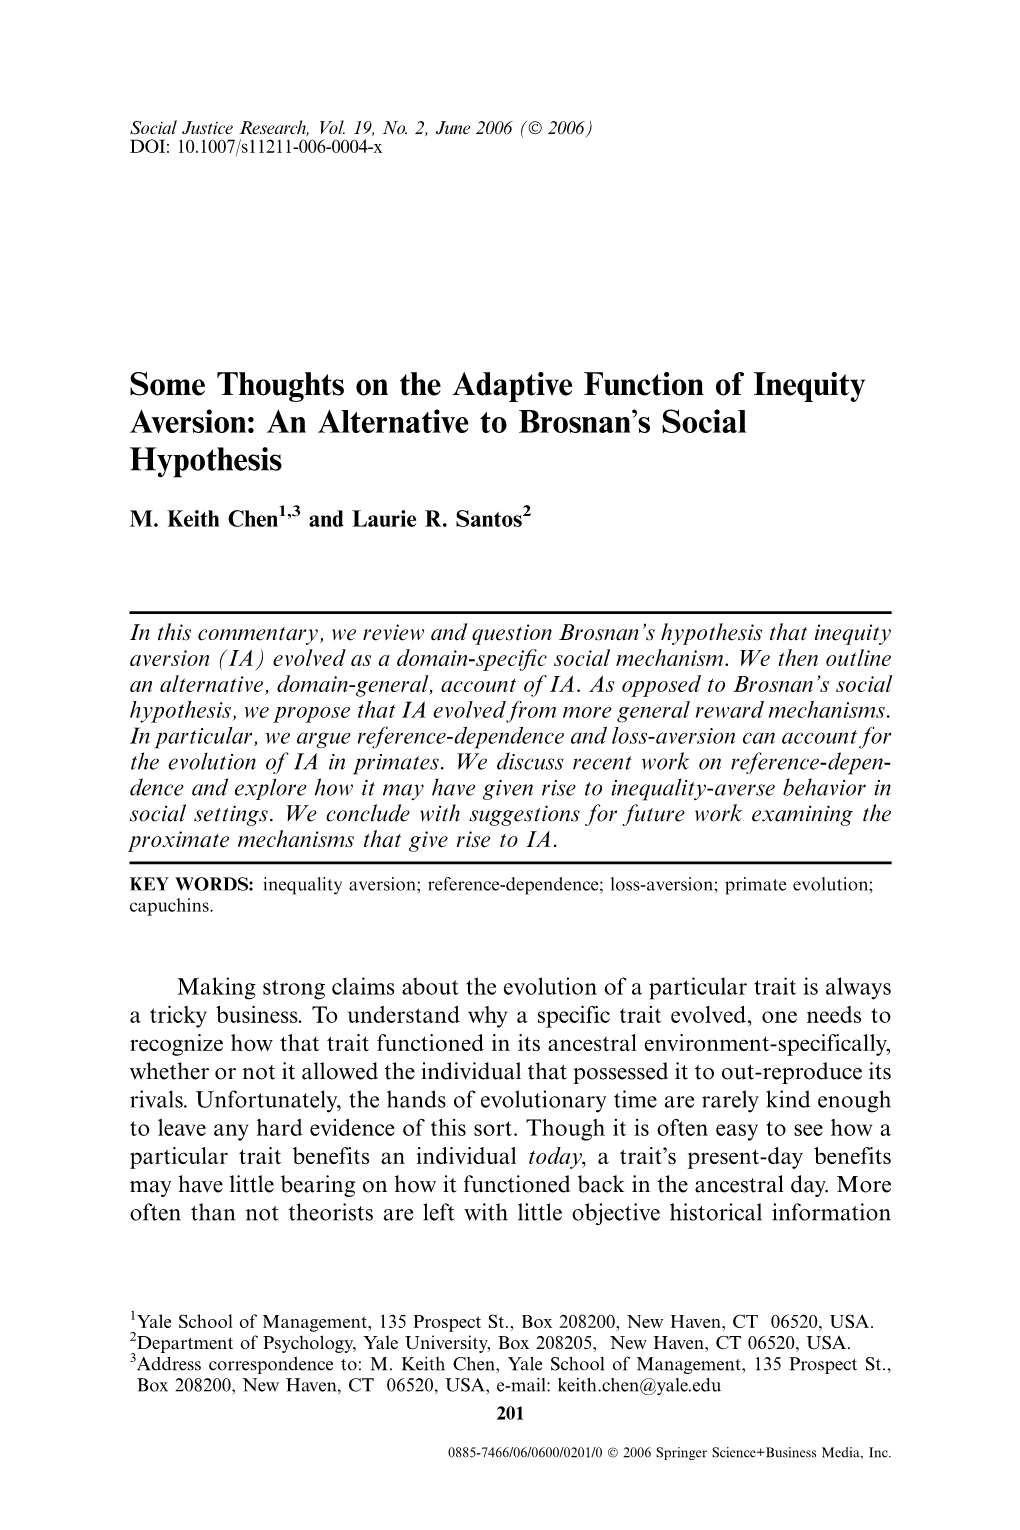 Some Thoughts on the Adaptive Function of Inequity Aversion: an Alternative to Brosnanõs Social Hypothesis